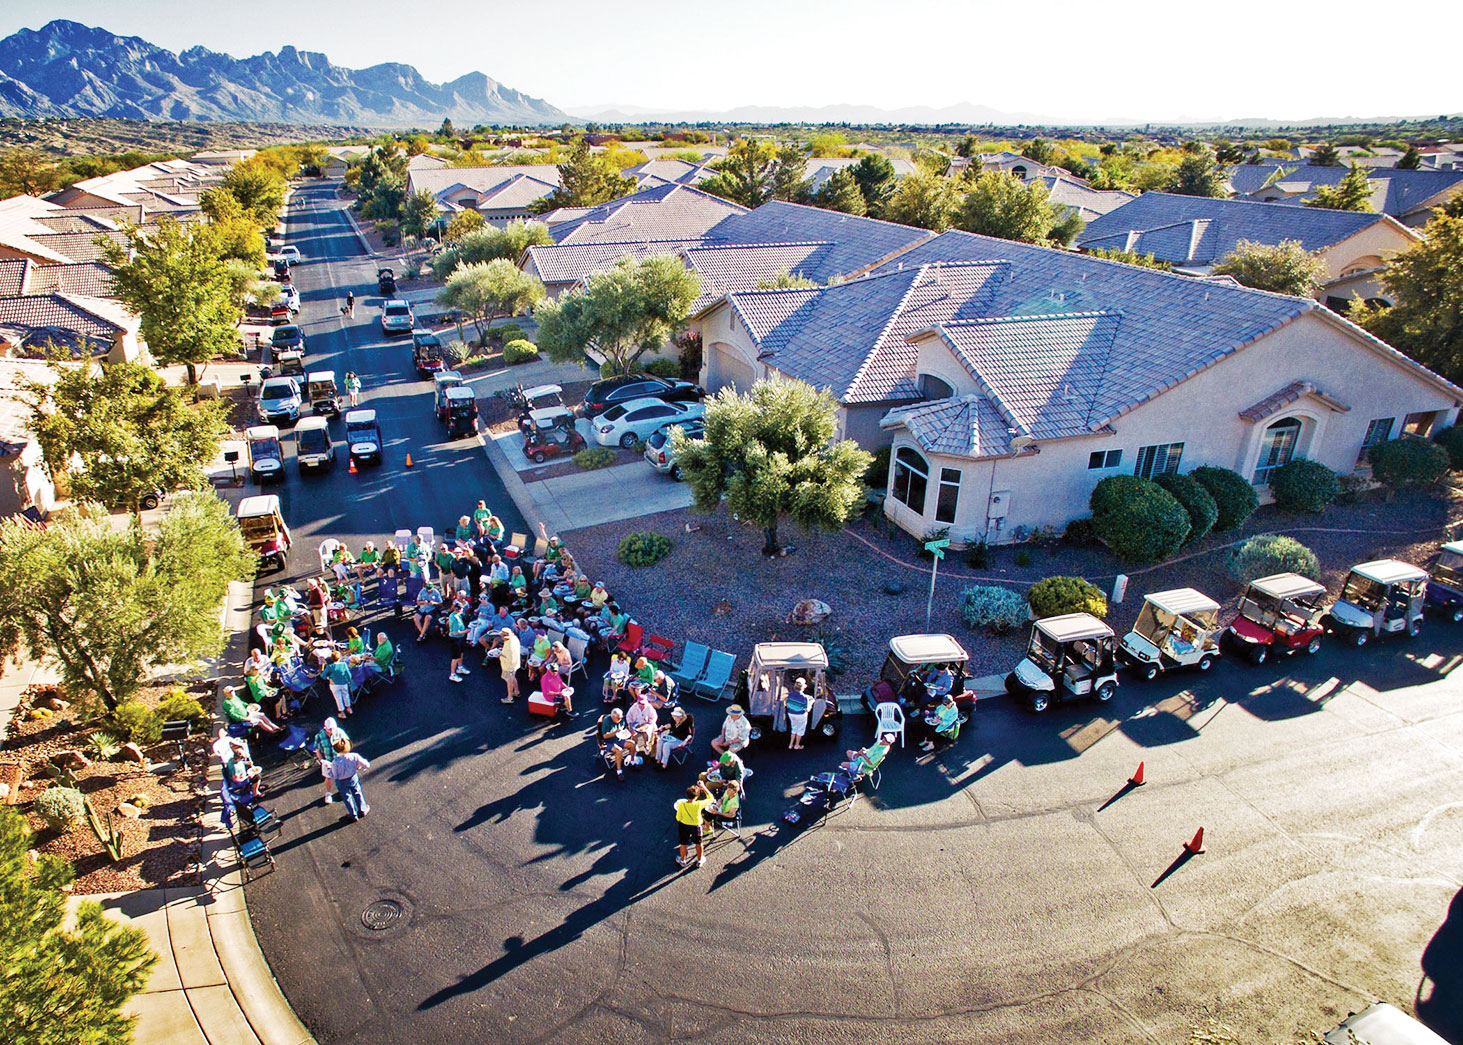 View from above of Villas 2 St. Patrick’s Day Party; photo courtesy of Larry Crabb